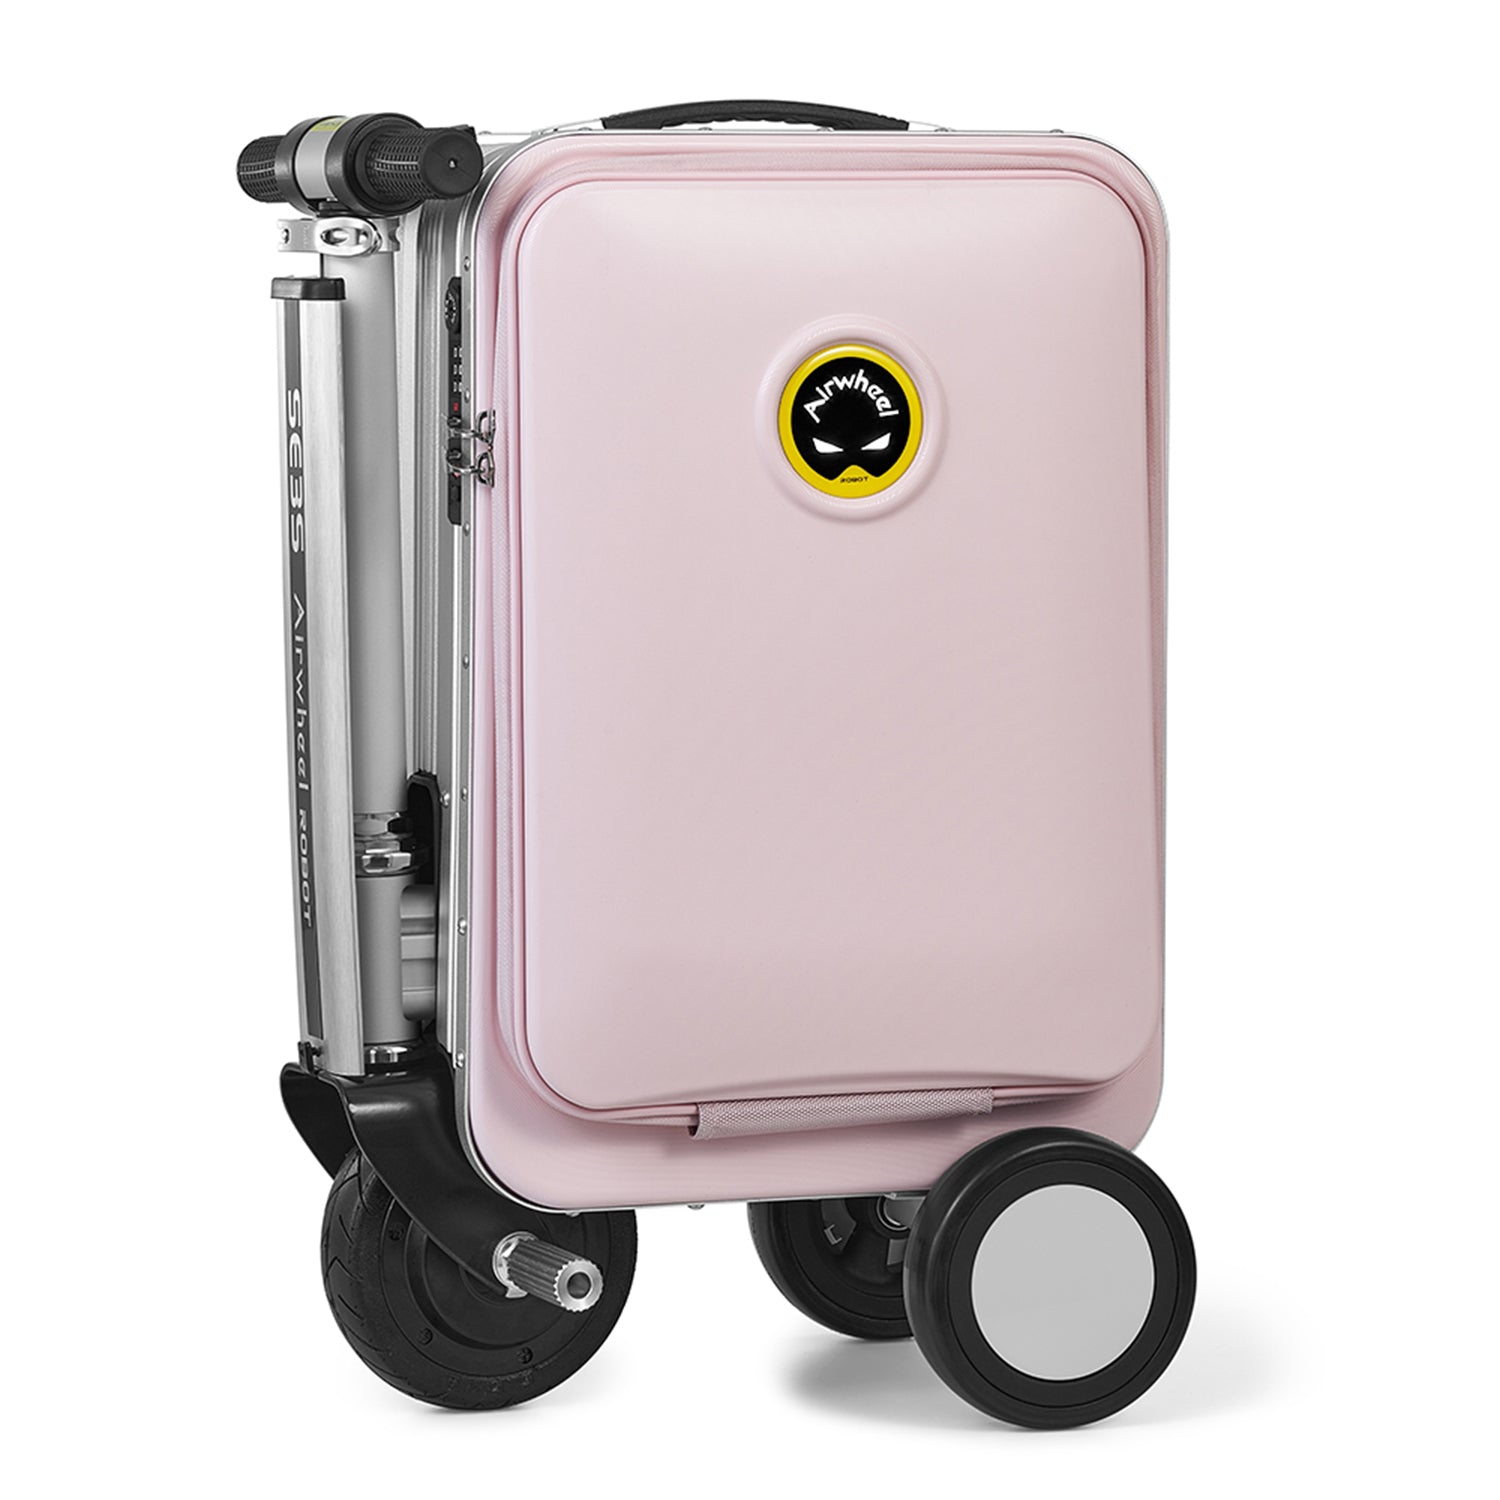 Airwheel SE3S 20 Inch Smart Riding Luggage Mini Smart Electric Scooter Suitcase 13Km/H Removable Power Battery Airline Boarding